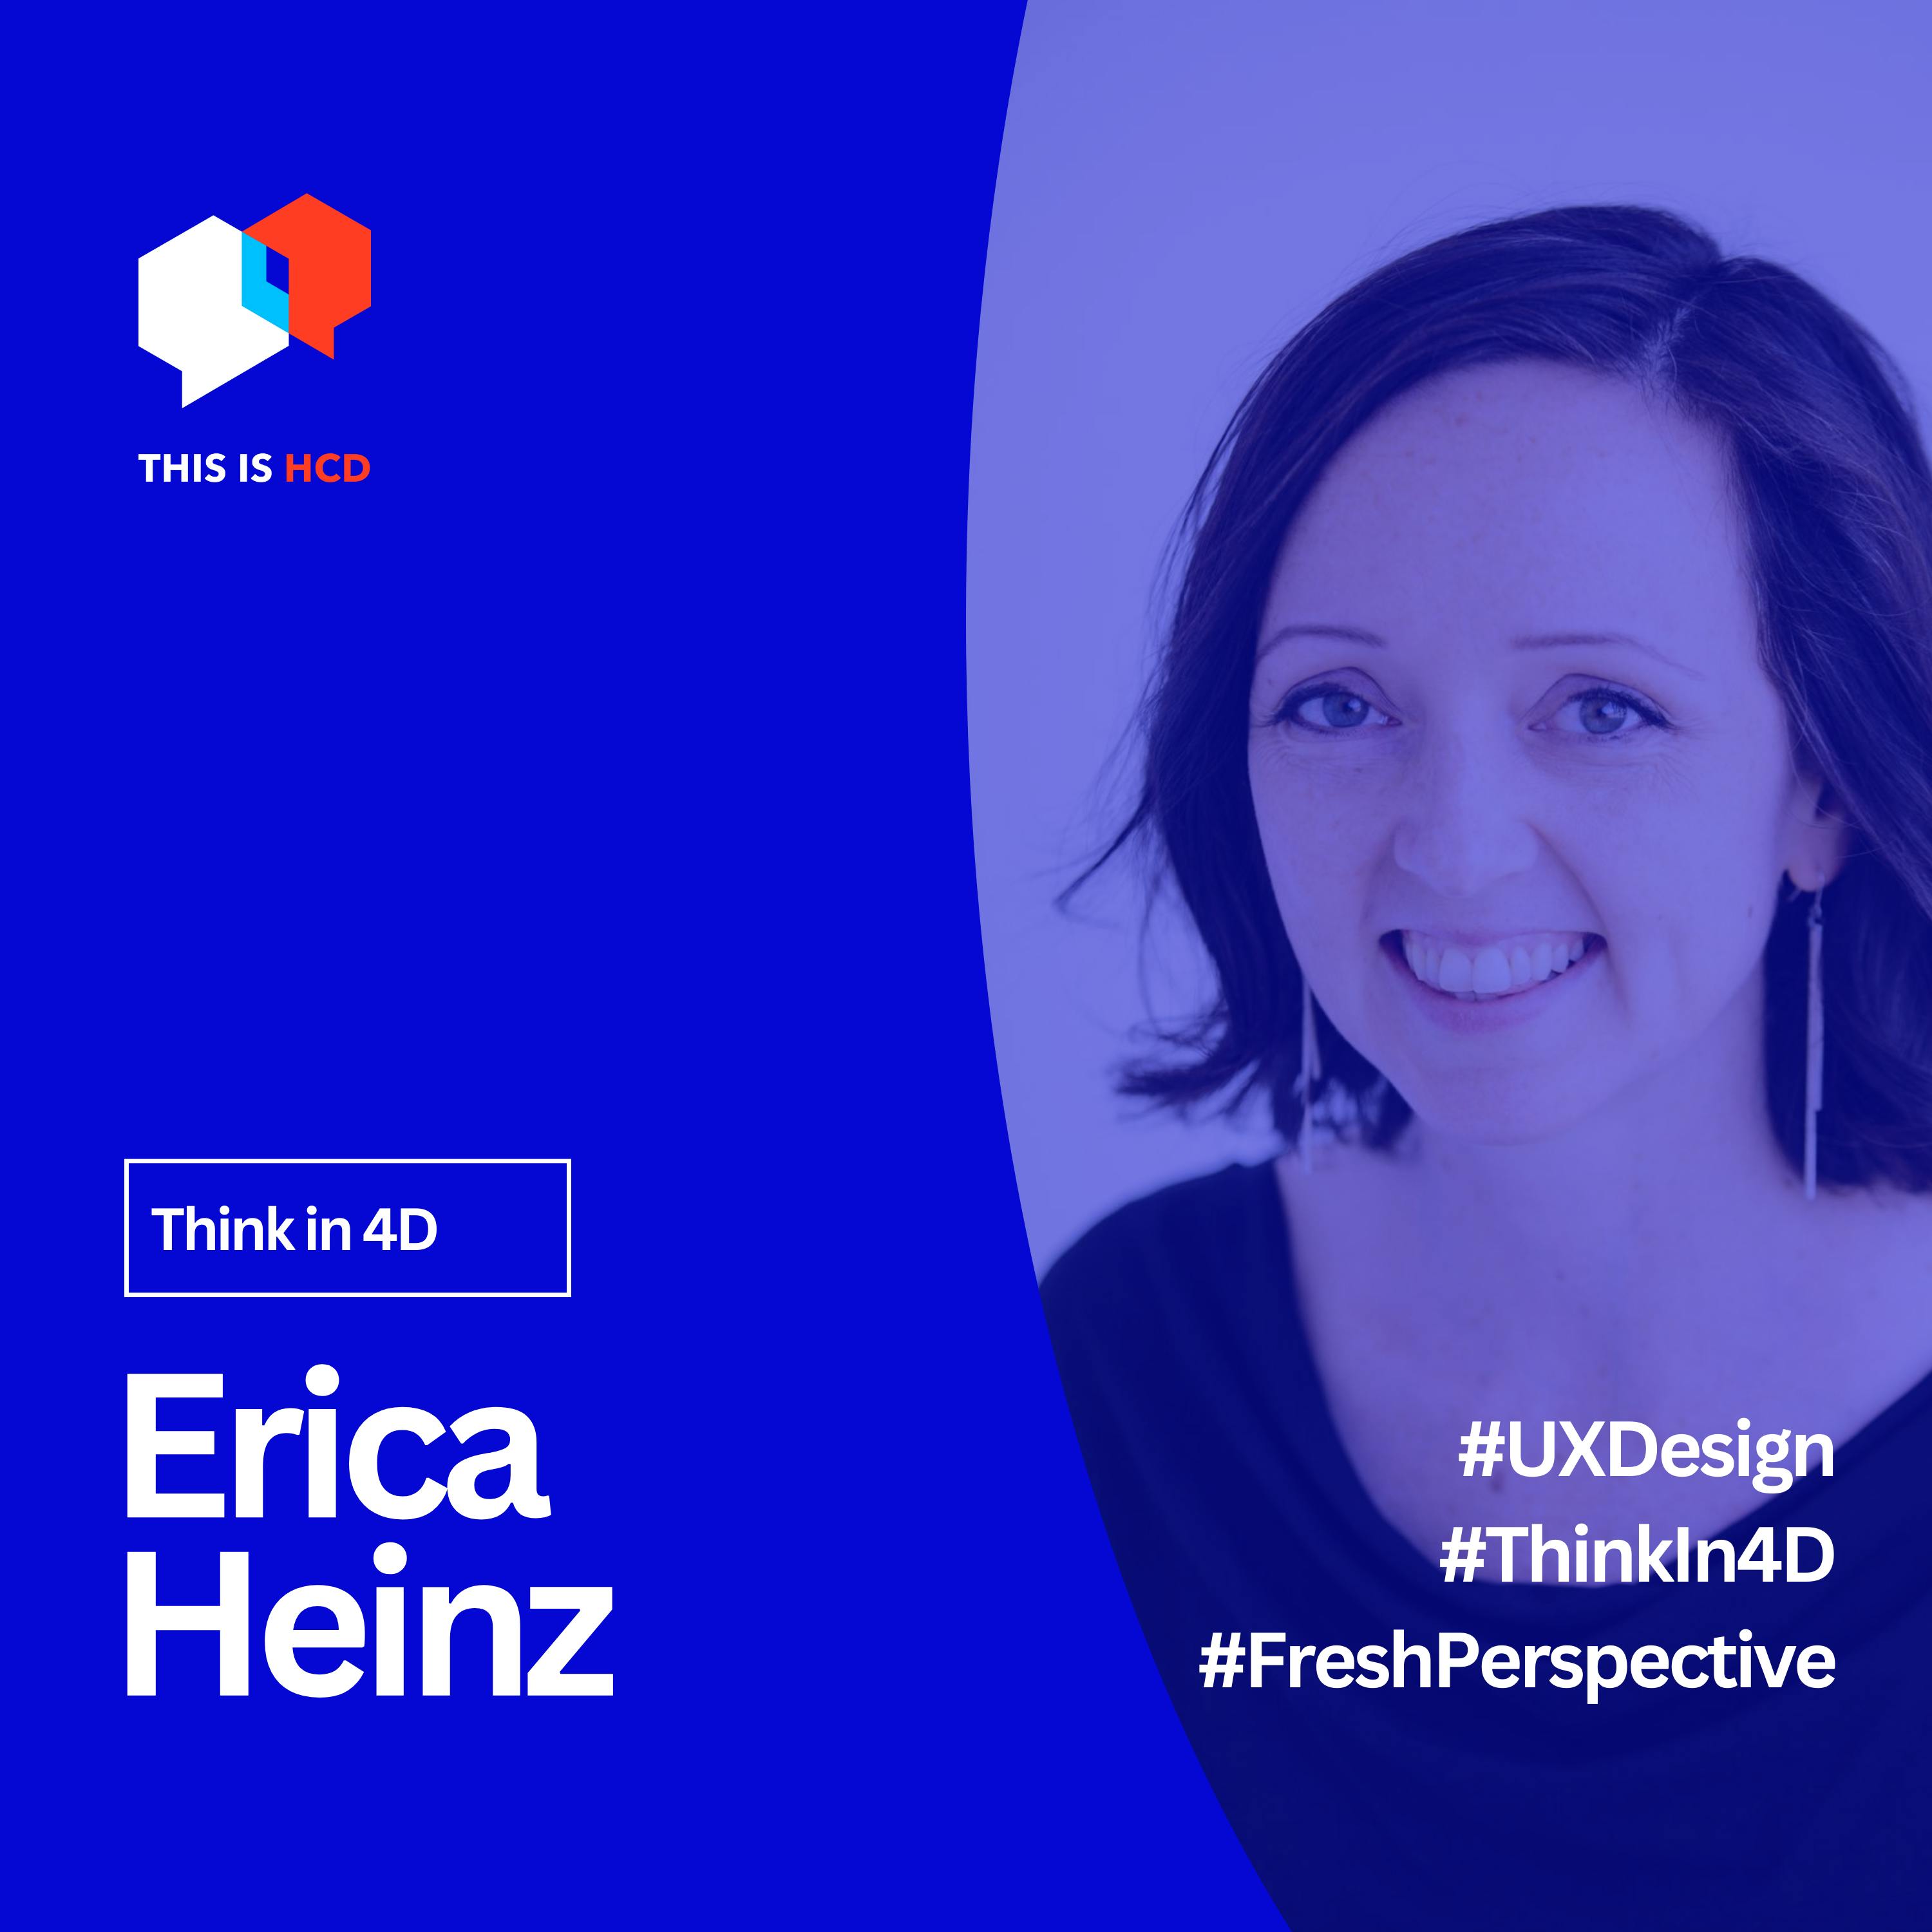 "A Fresh Perspective on UX: 'Think in 4D' with Erica Heinz"